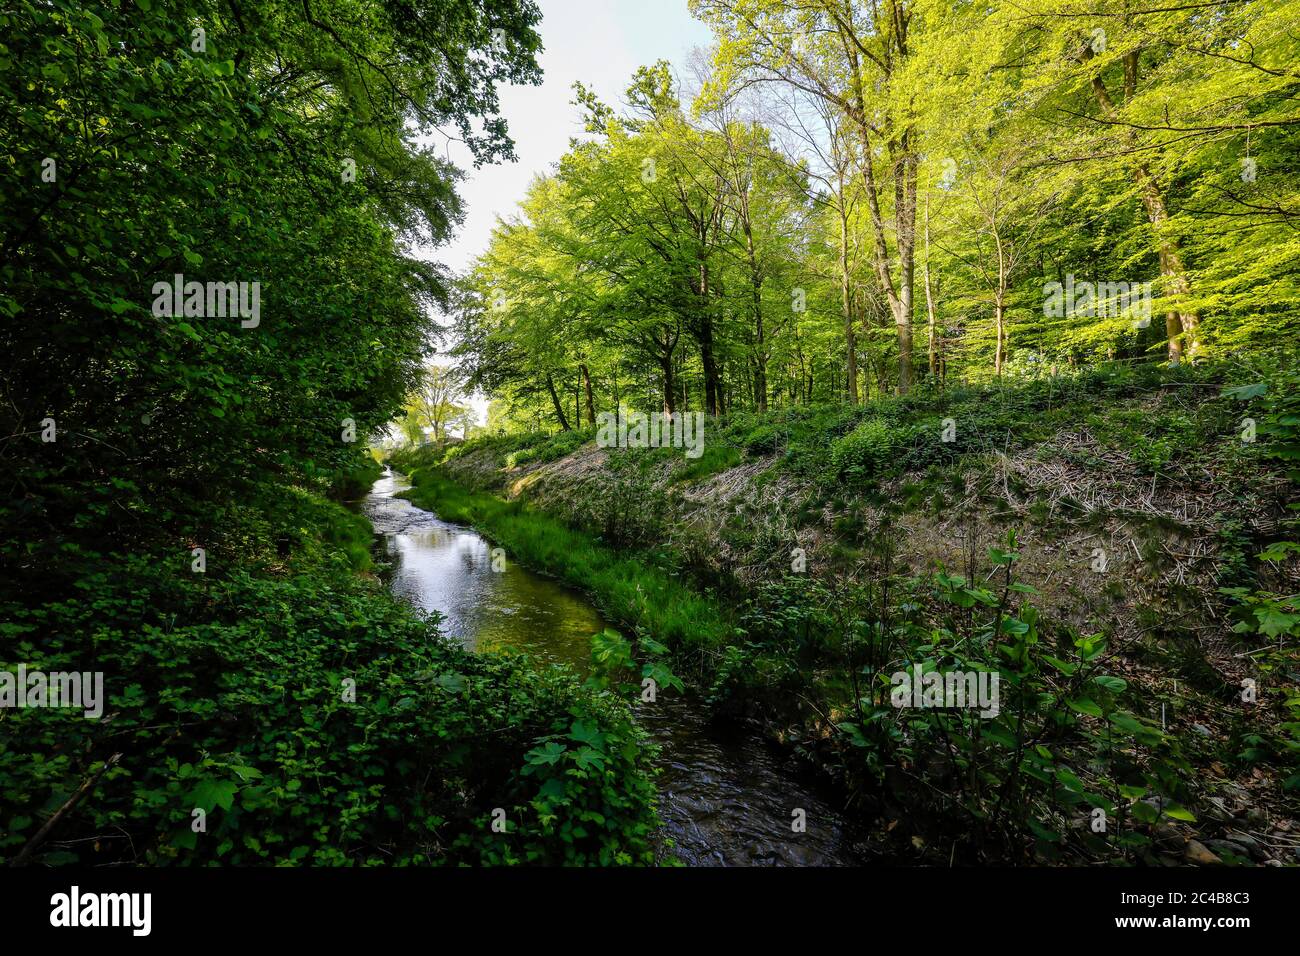 Renaturalised watercourse, the Hellbach belongs to the Emscher river system, was previously an open, above-ground sewer, Emscher conversion Stock Photo